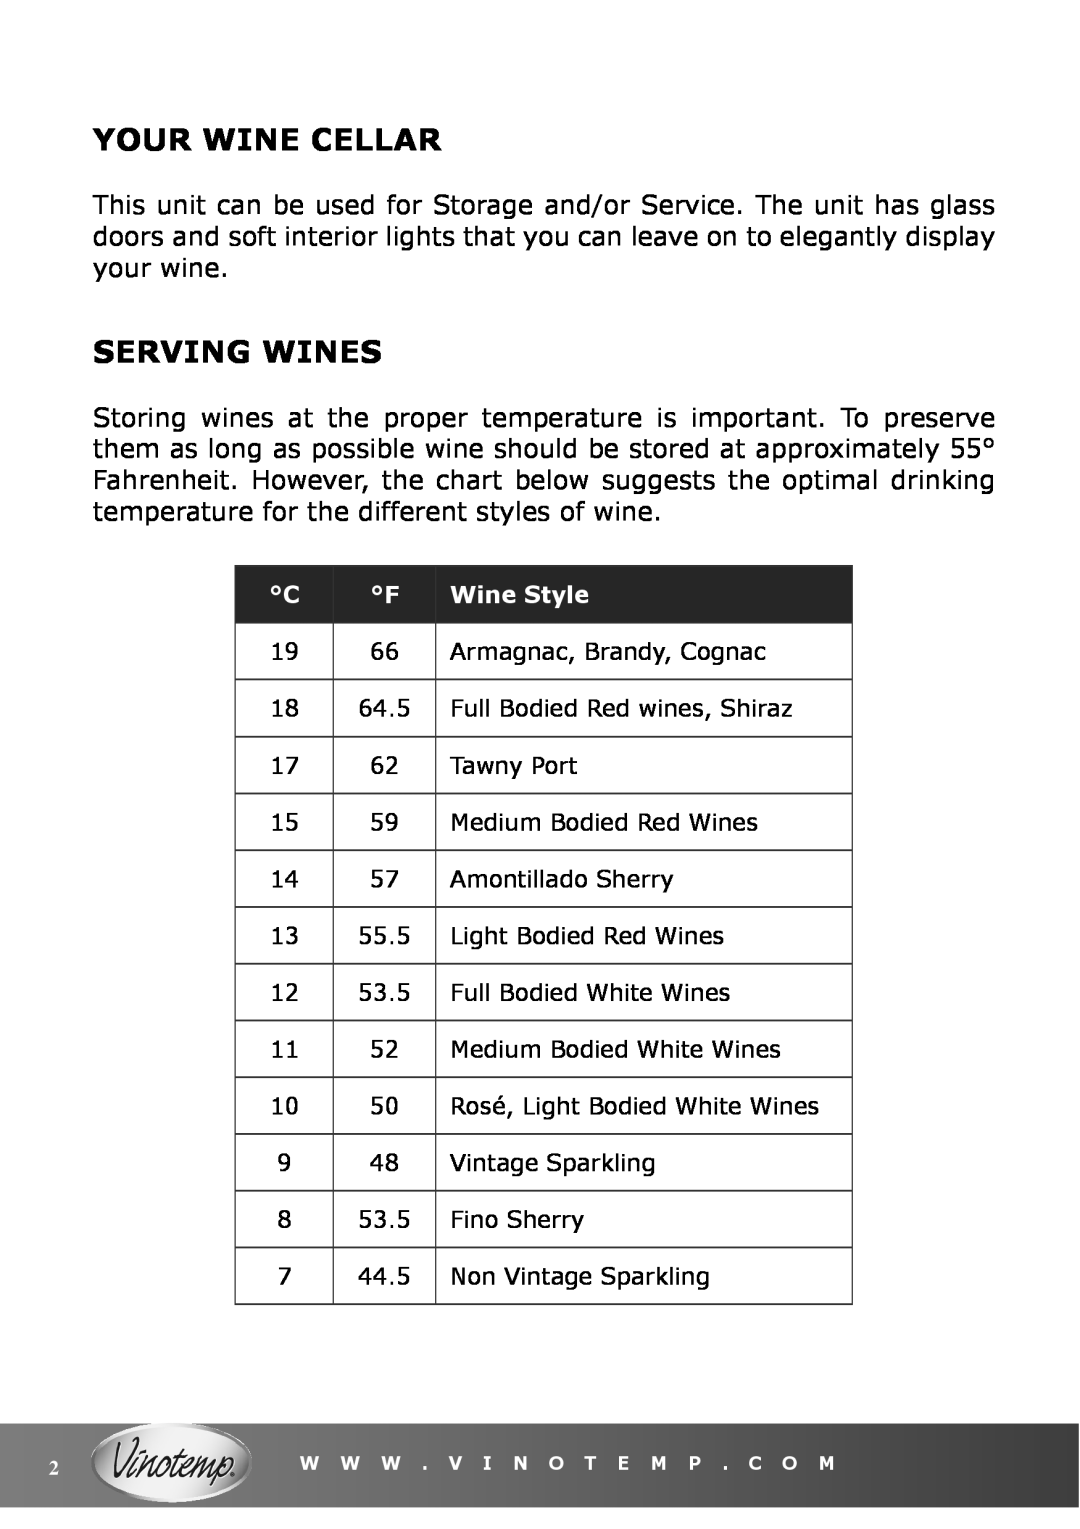 Vinotemp VT-36 owner manual Your Wine Cellar, Serving Wines, Wine Style 